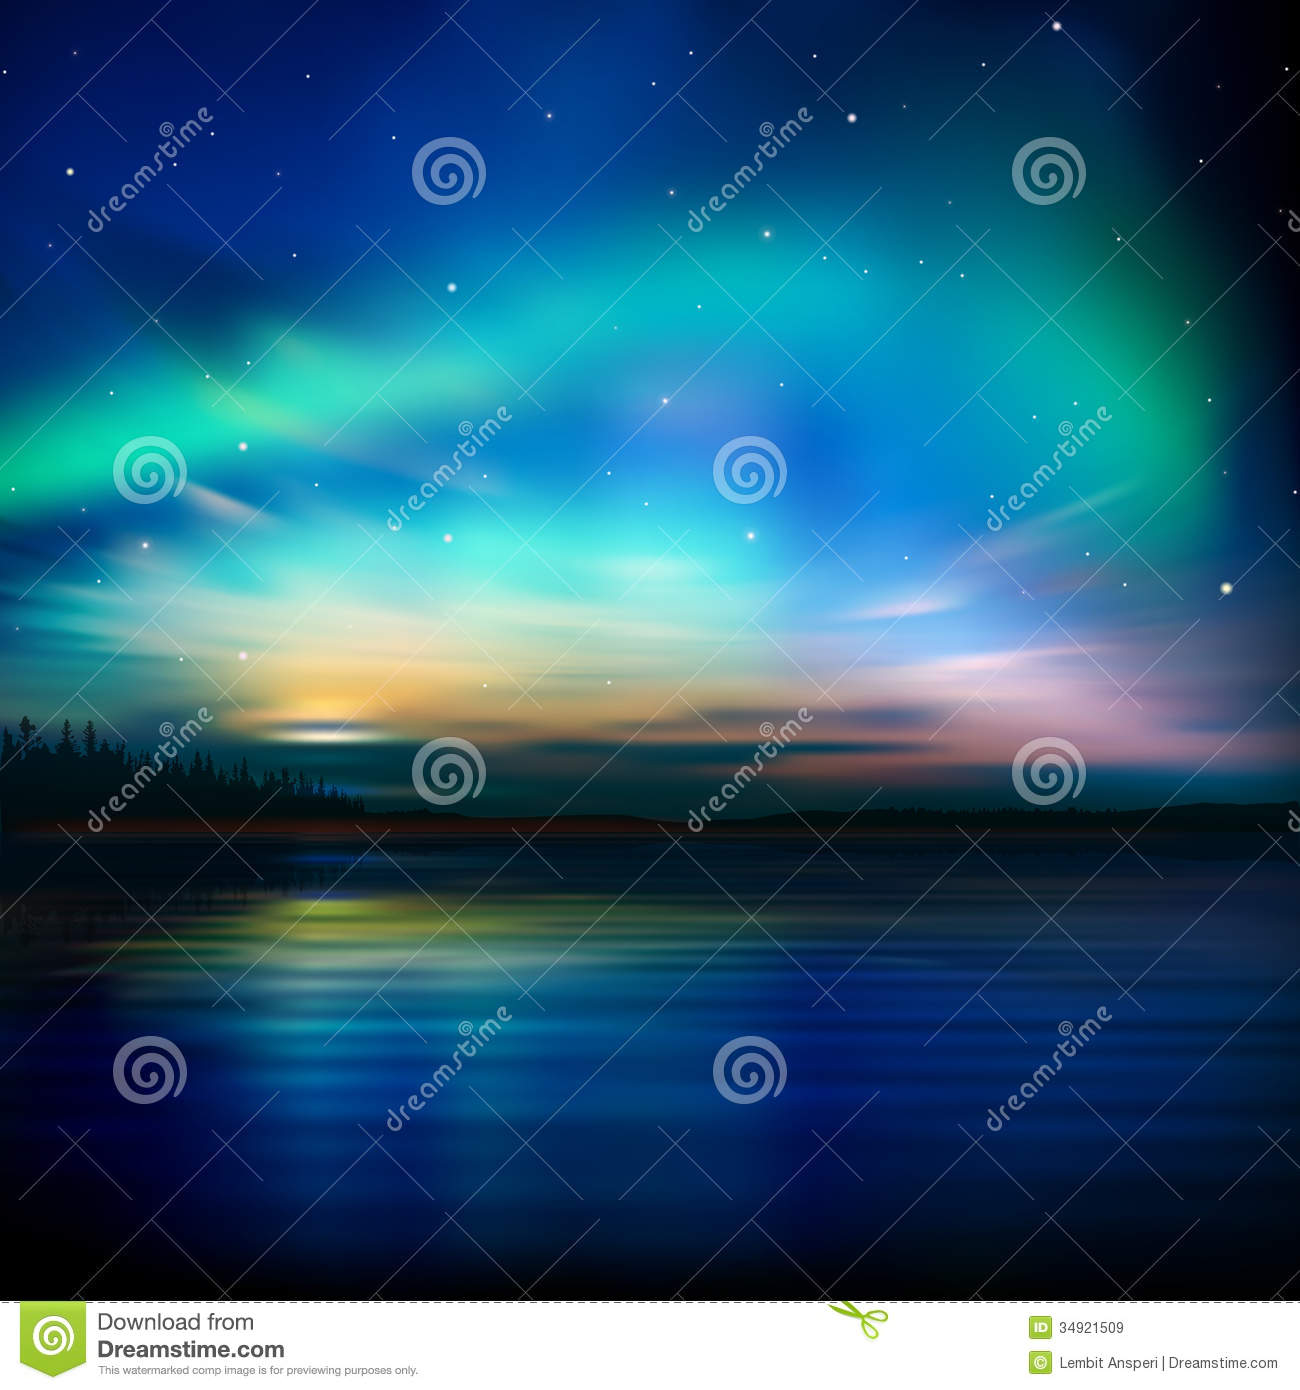 Abstract Background With Sunset And Mountains Royalty Free Stock